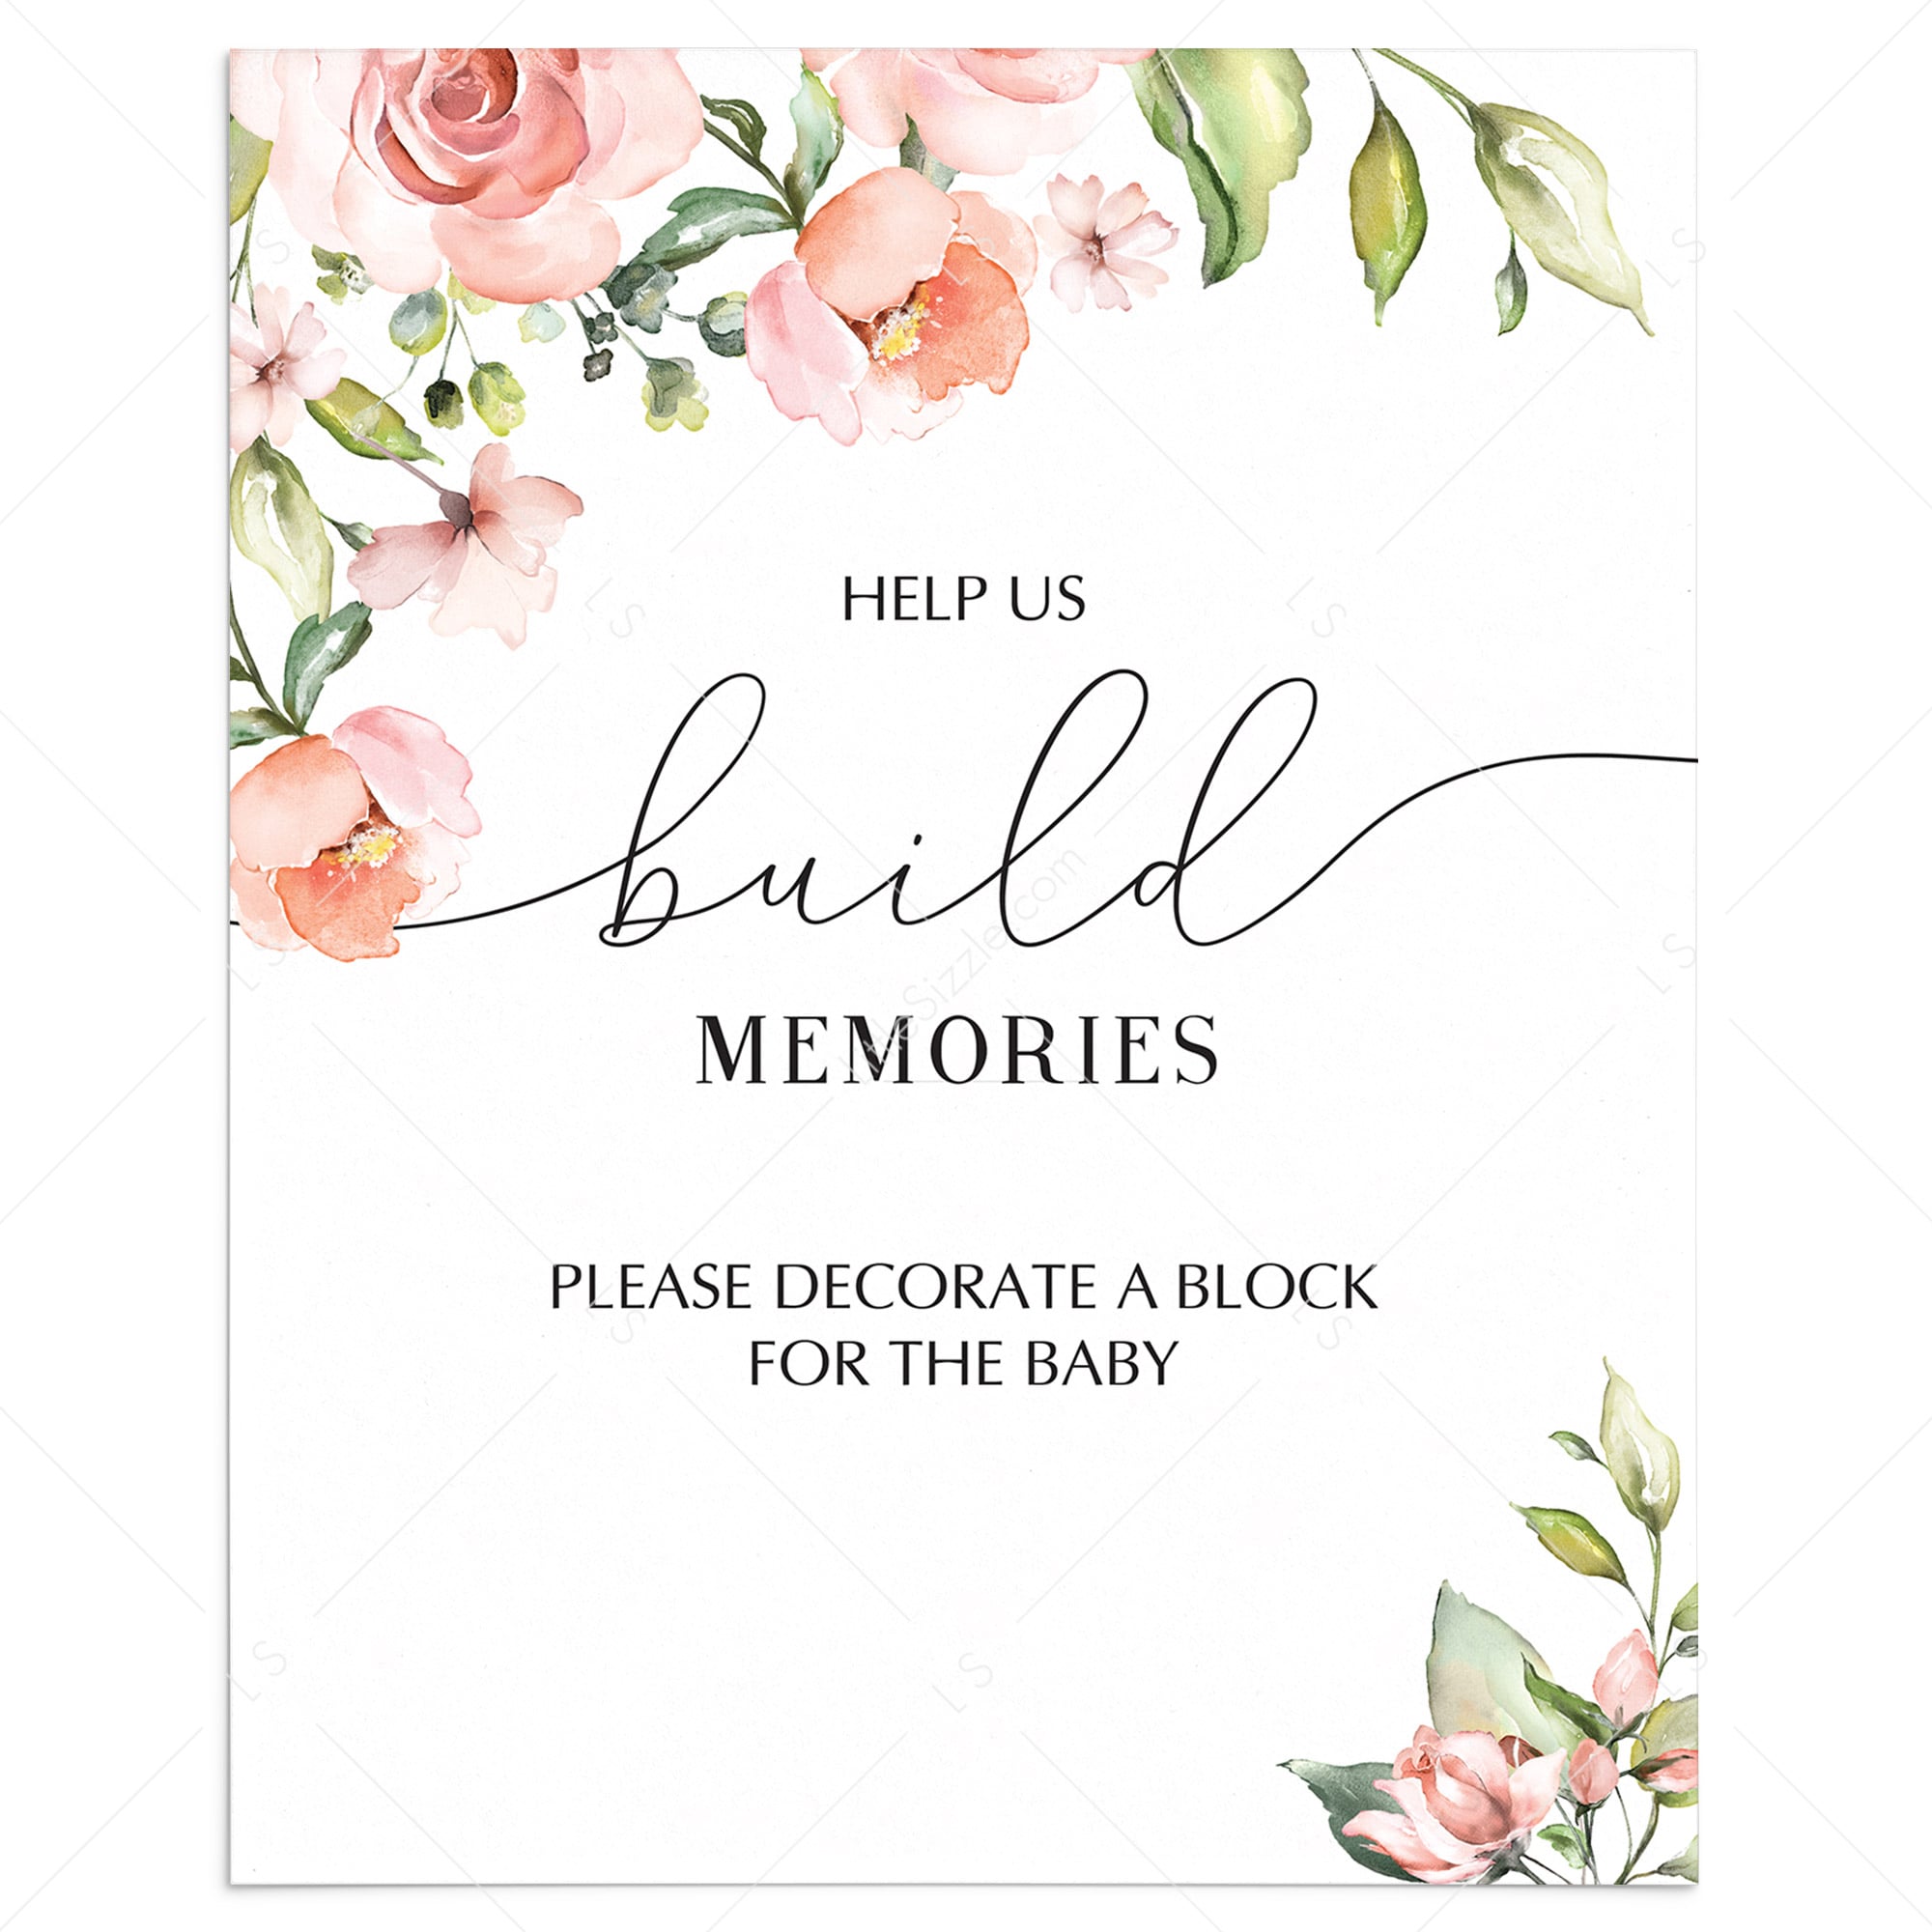 Decorate a block baby shower games floral theme by LittleSizzle